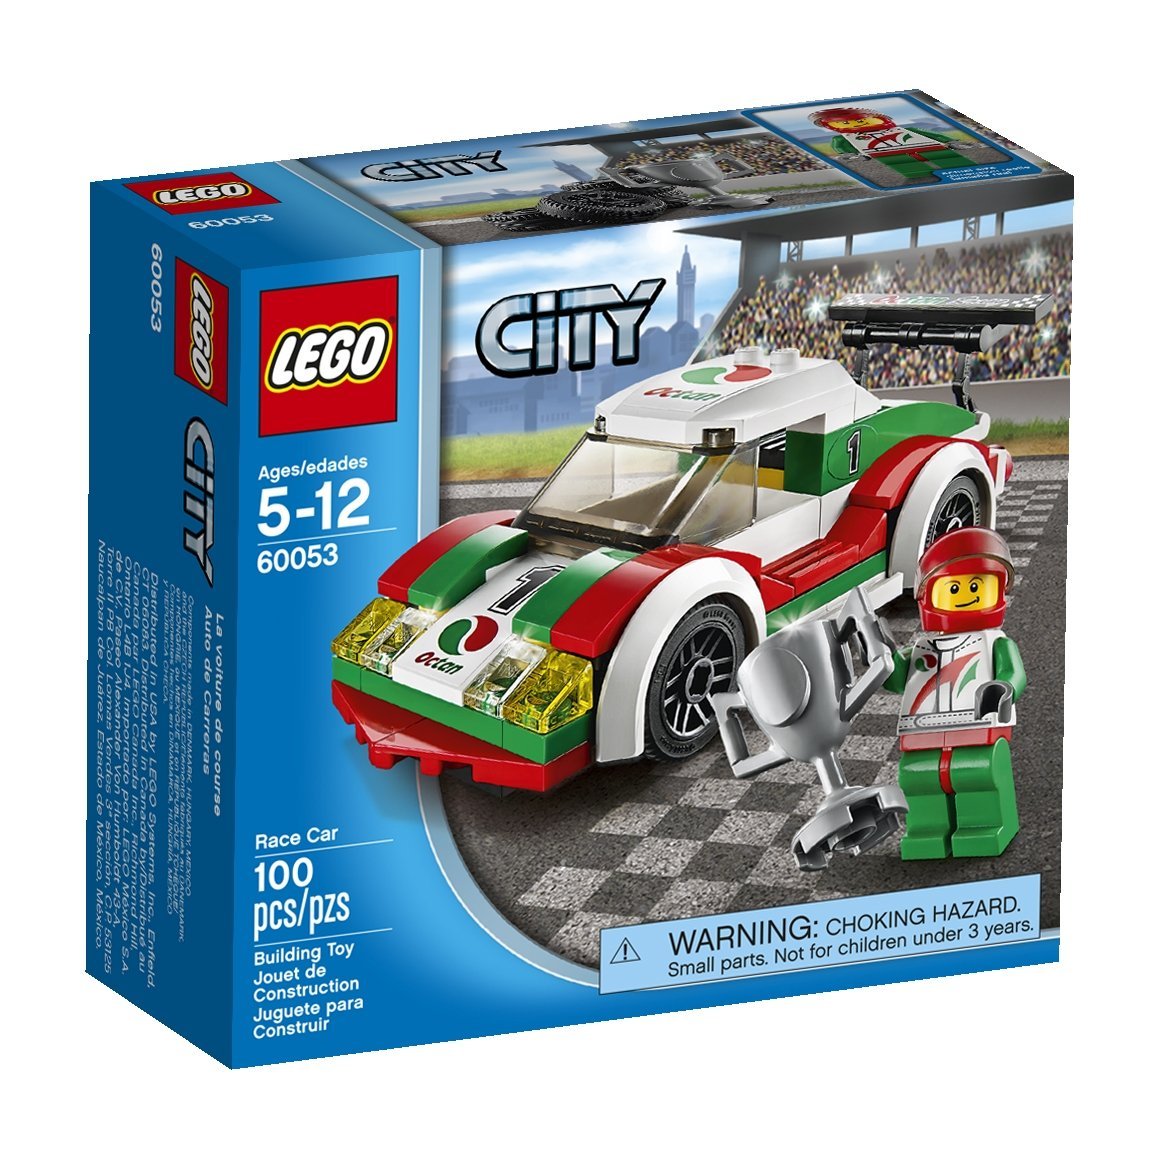 LEGO City Great Vehicles Race Car Only $8.97!